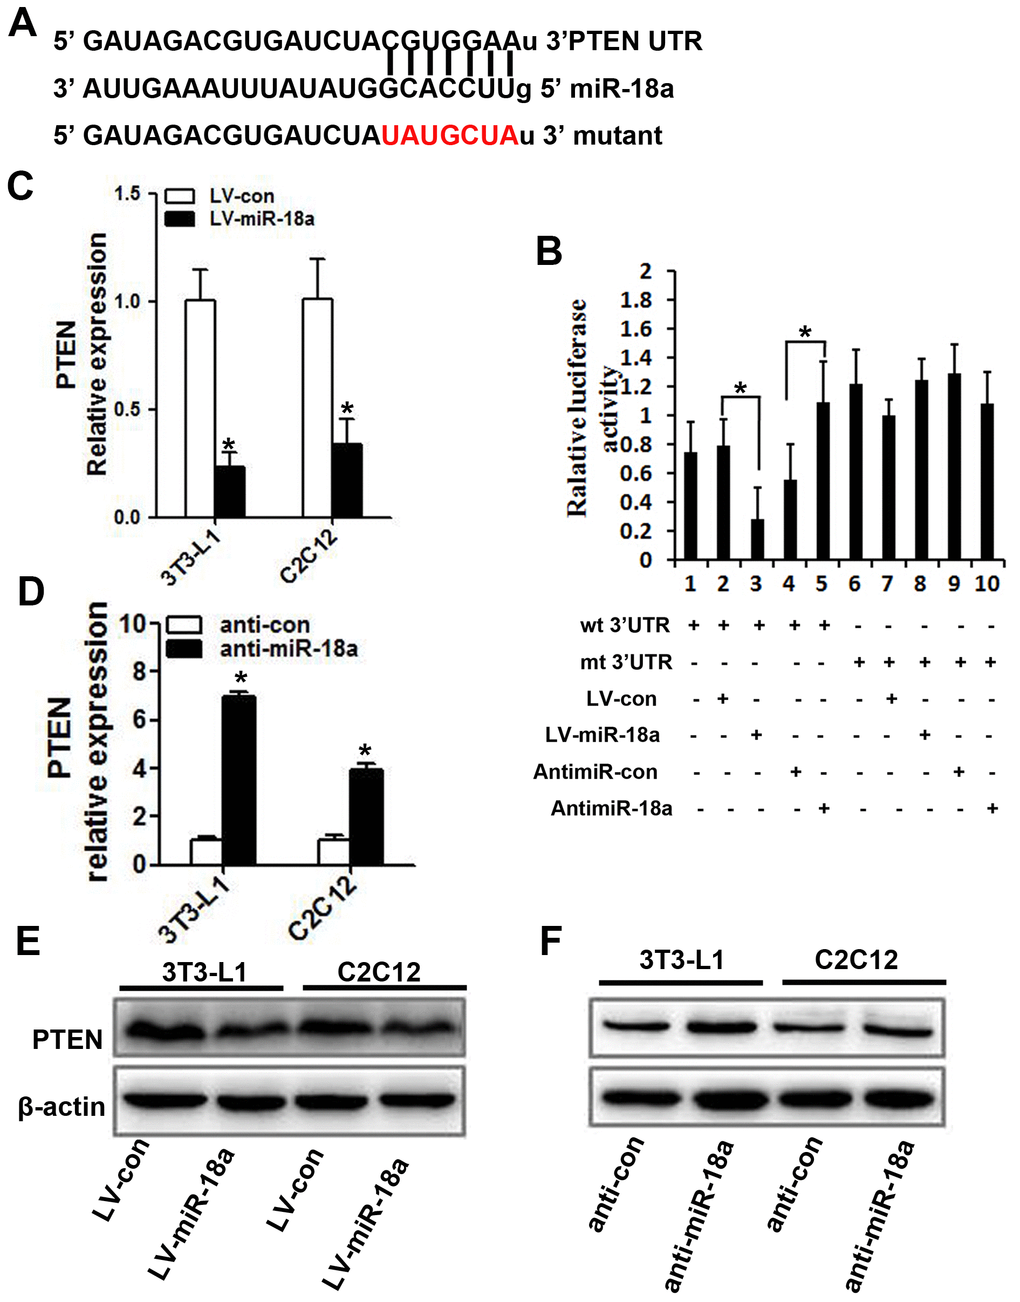 PTEN is a target gene of miR-18a. (A) The predicted binding sequence for miR-18a within the human PTEN 3’UTR. Seed sequences are highlighted. (B) Luciferase reporter assay in 3T3-L1 cells. The bar graph displays the mean ± SD of three independent transfection experiments. *PC, D) PTEN mRNA levels in 3T3-L1 and C2C12 cells transfected with LV-miR-18a, anti-miR-18a or the corresponding controls (LV-con and anti-con, respectively). (E, F) PTEN protein levels were assessed using Western blotting in 3T3-L1 and C2C12 cells transfected with LV-miR-18a, LV-con, anti-miR-18a or anti-con.